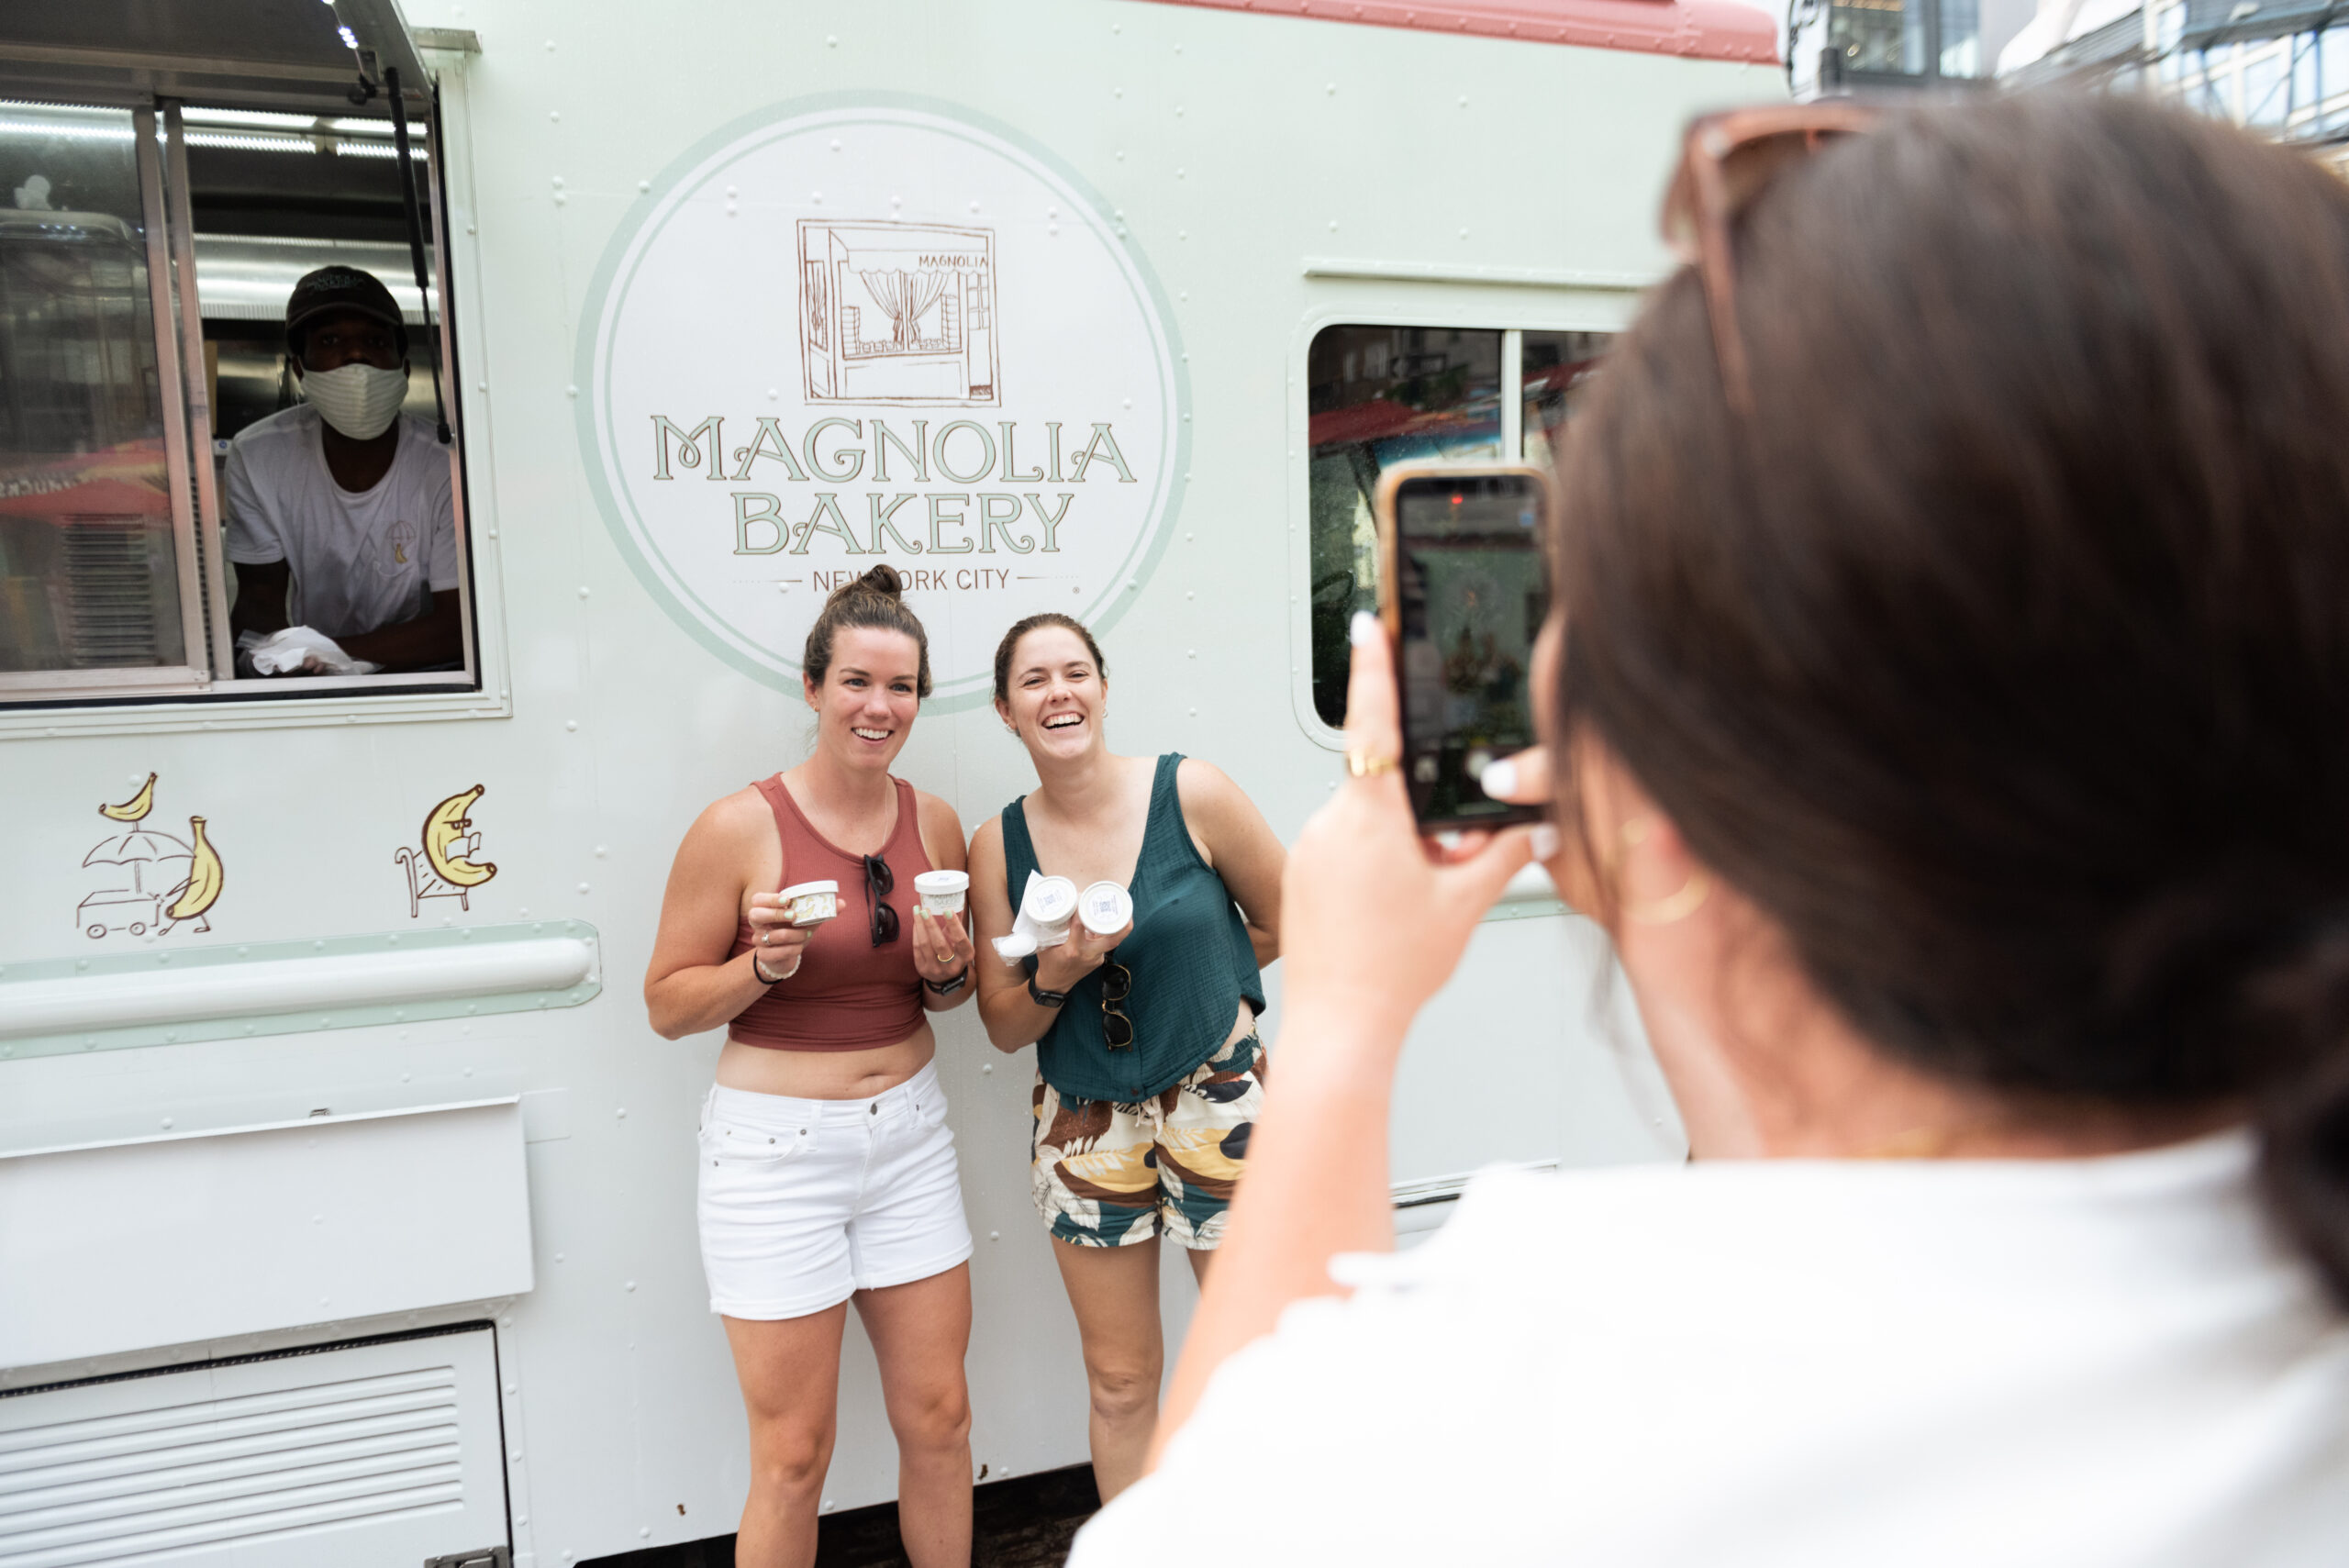 New Yorkers Holding Free Banana Pudding From Magnolia Bakery Food Truck